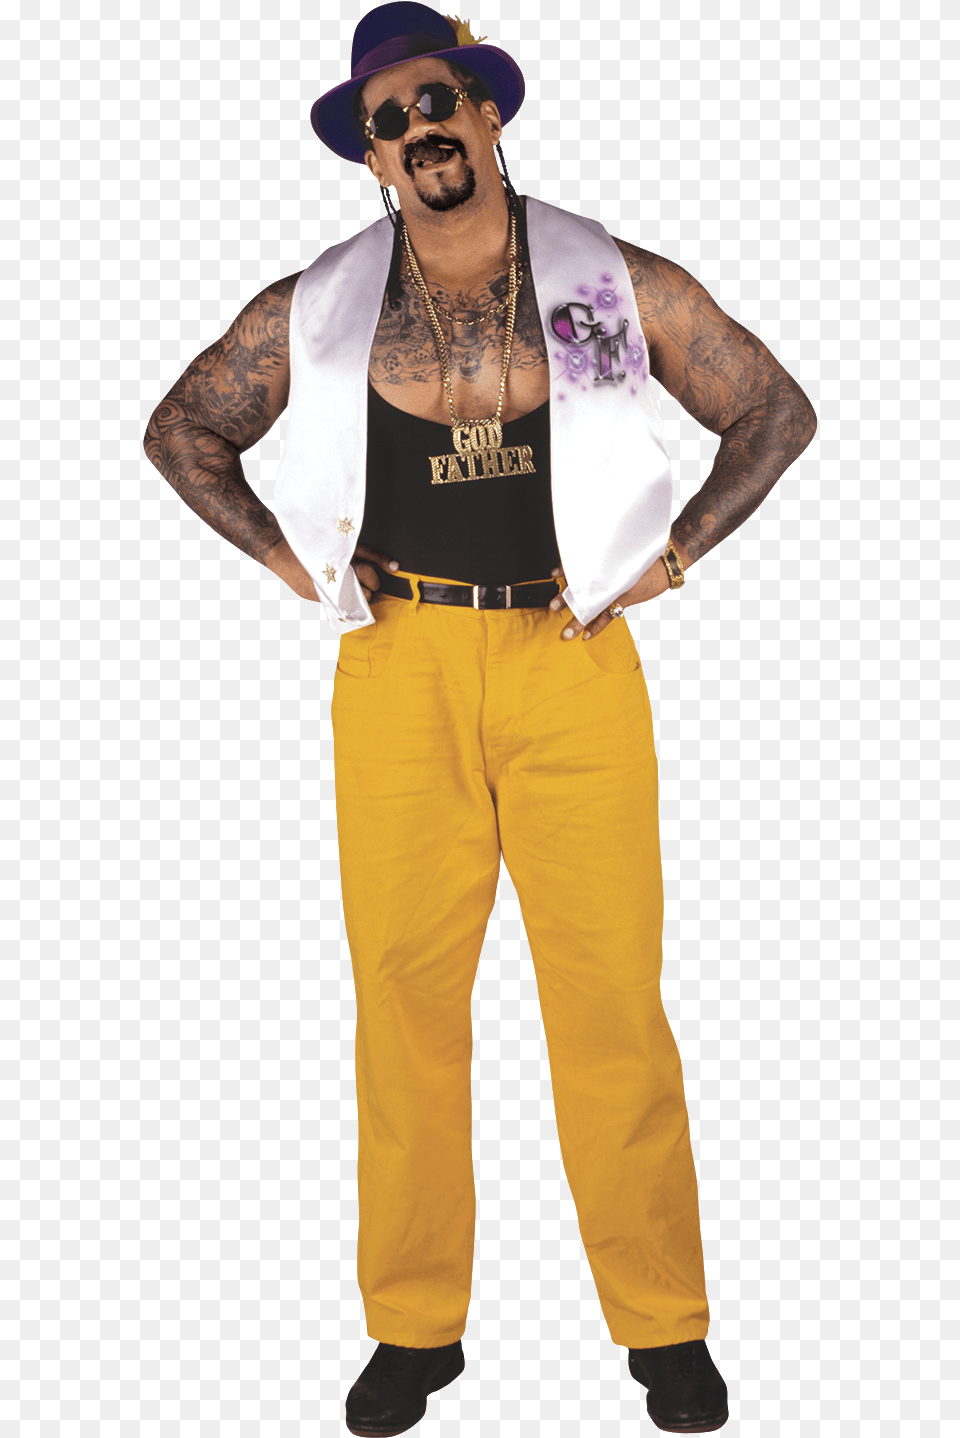 Godfather Wwe Transparent Costume, Vest, Tattoo, Skin, Person Png Image